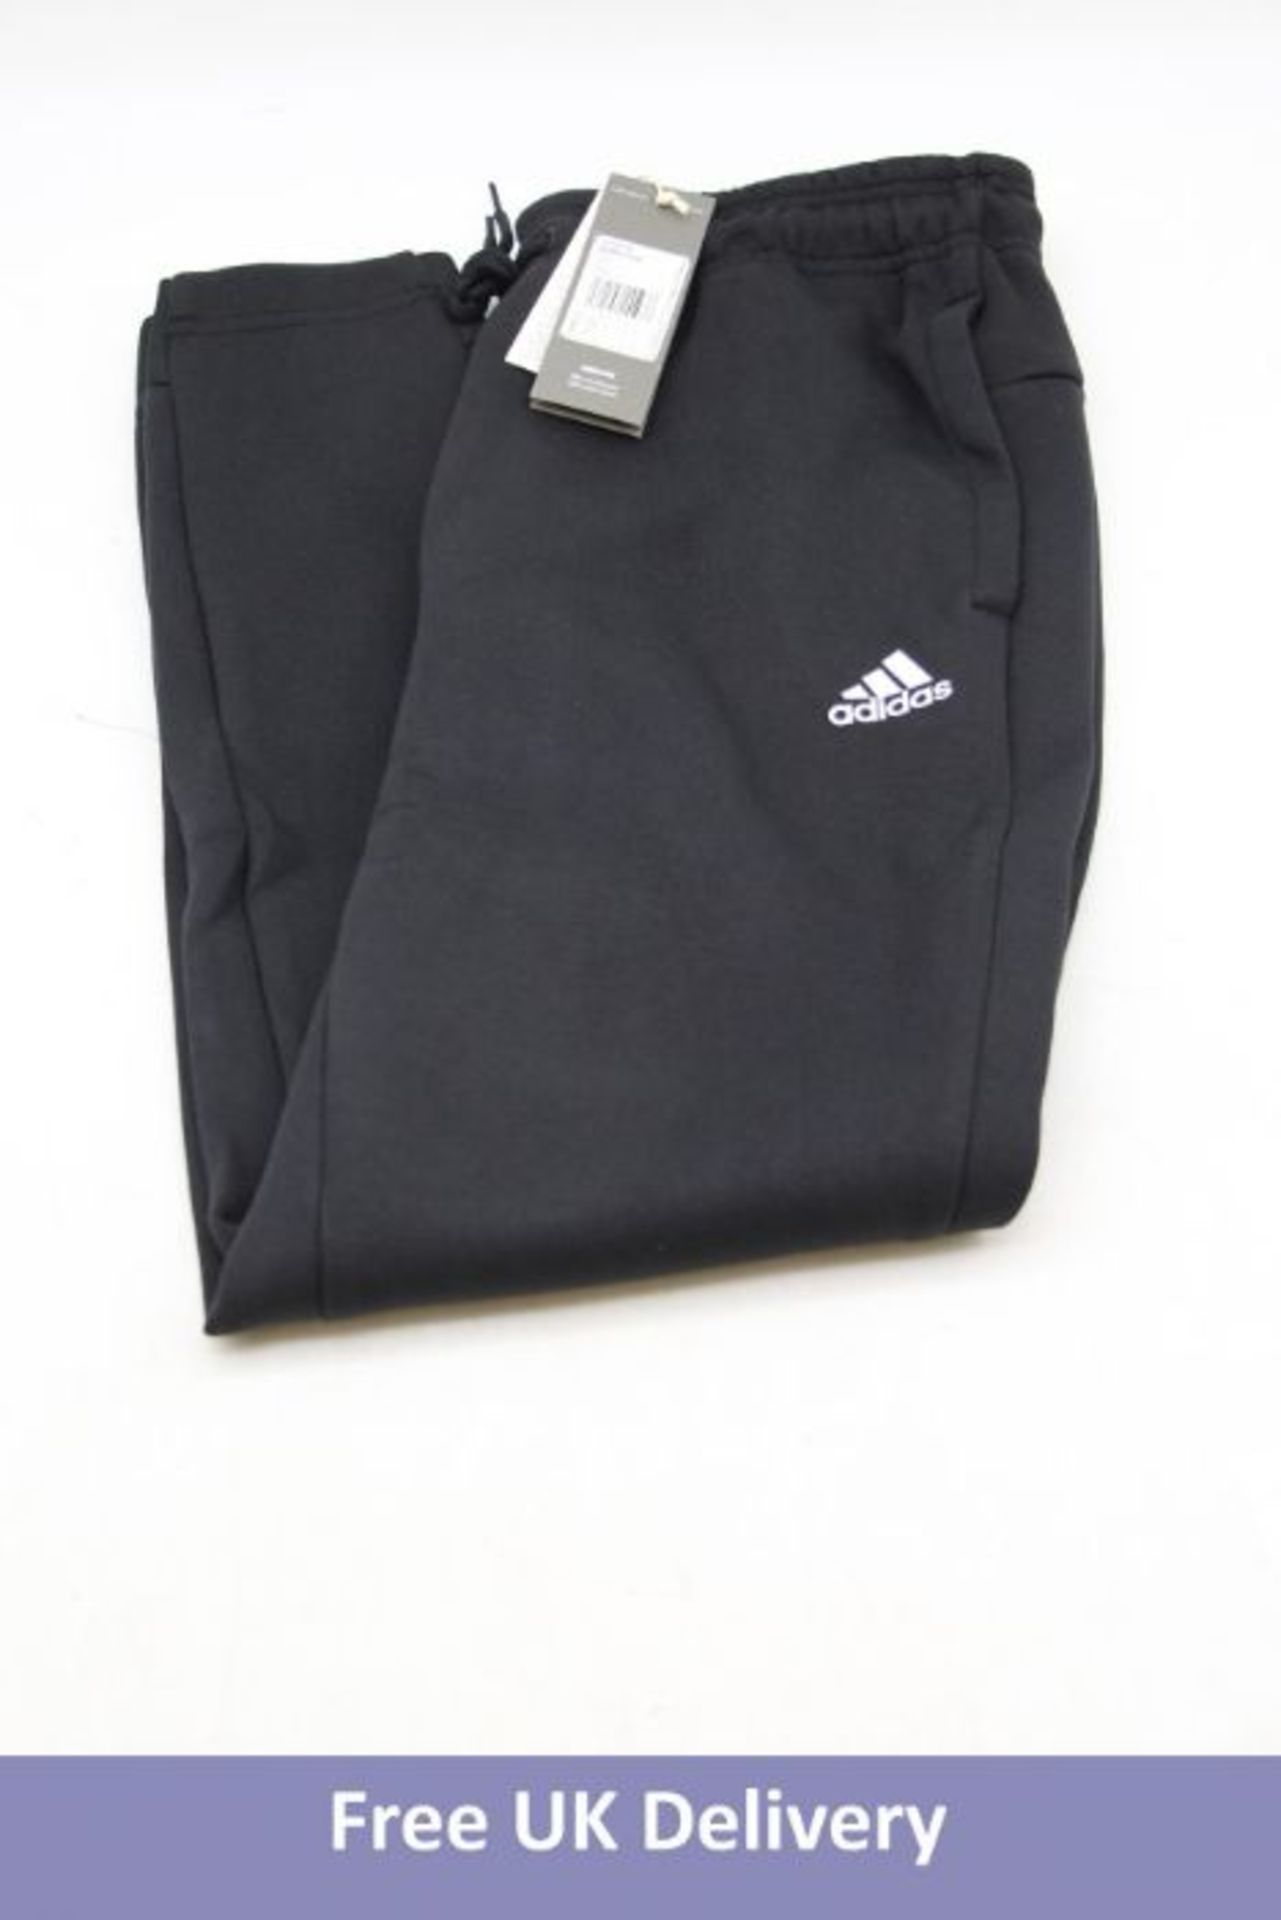 Six Adidas Women's Must Haves Joggers, Black, Large